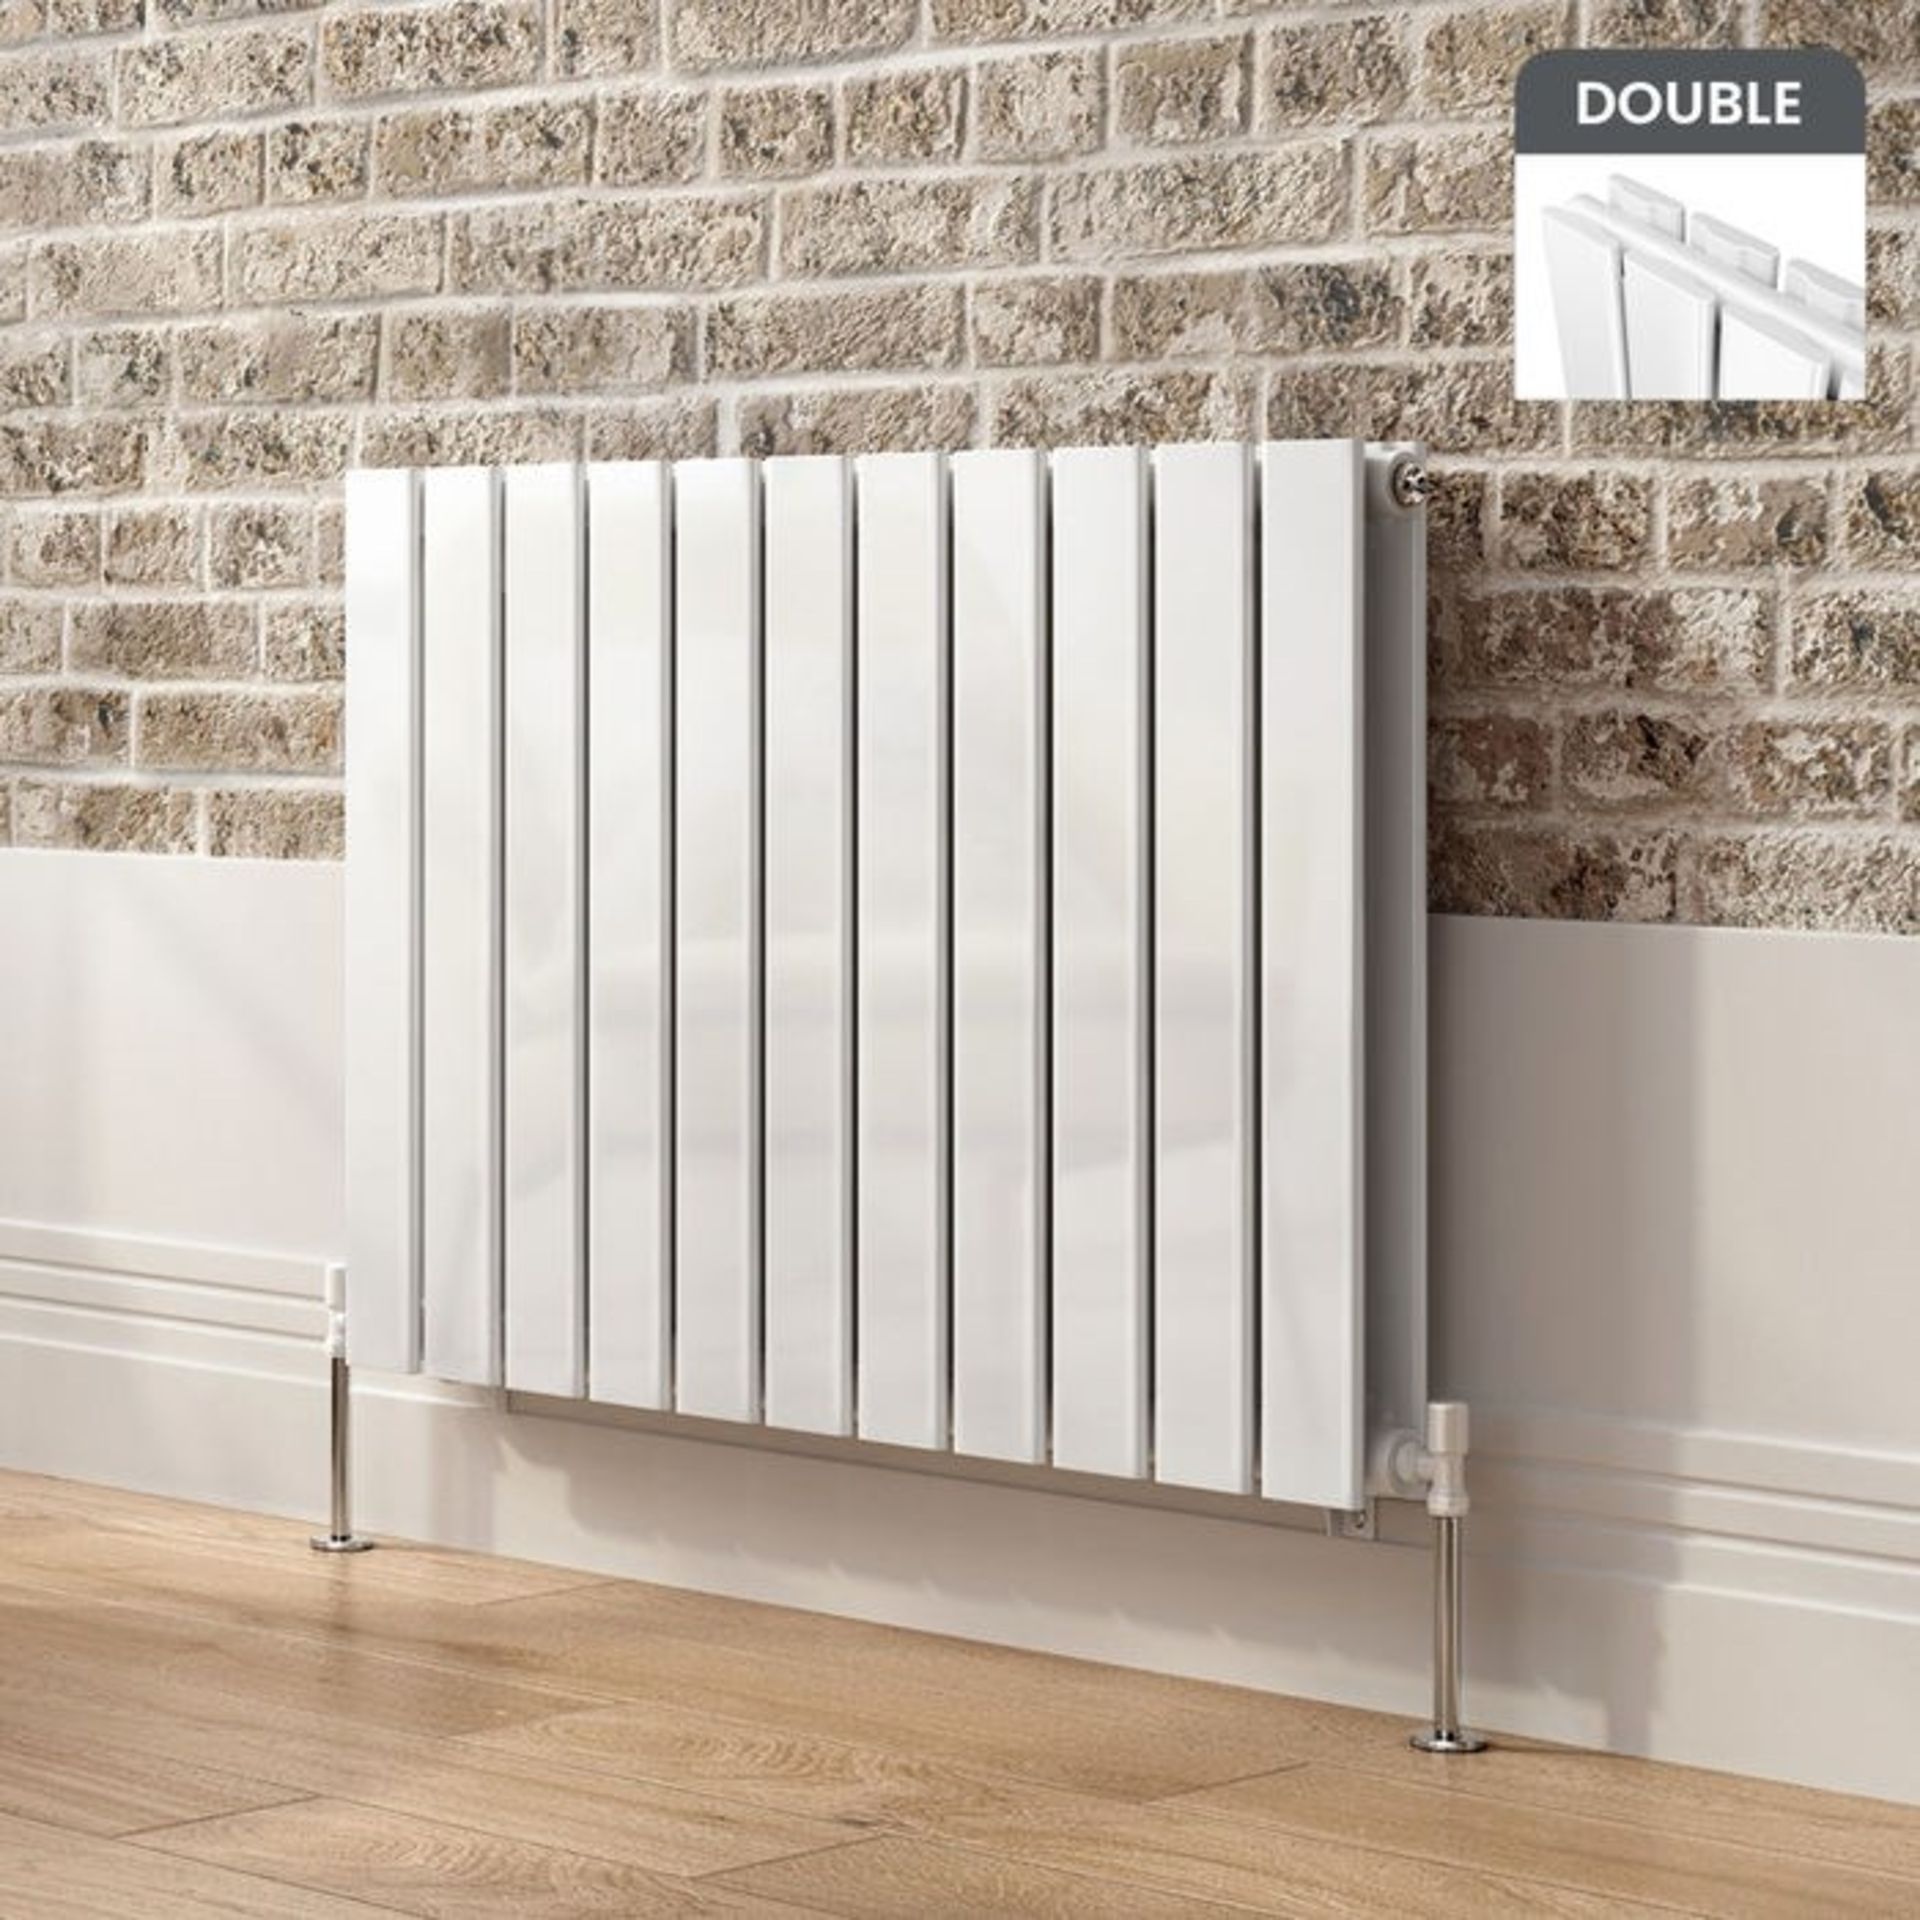 600x830mm Gloss White Double Flat Panel Horizontal Radiator. RRP £474.99.RC221.Made with...